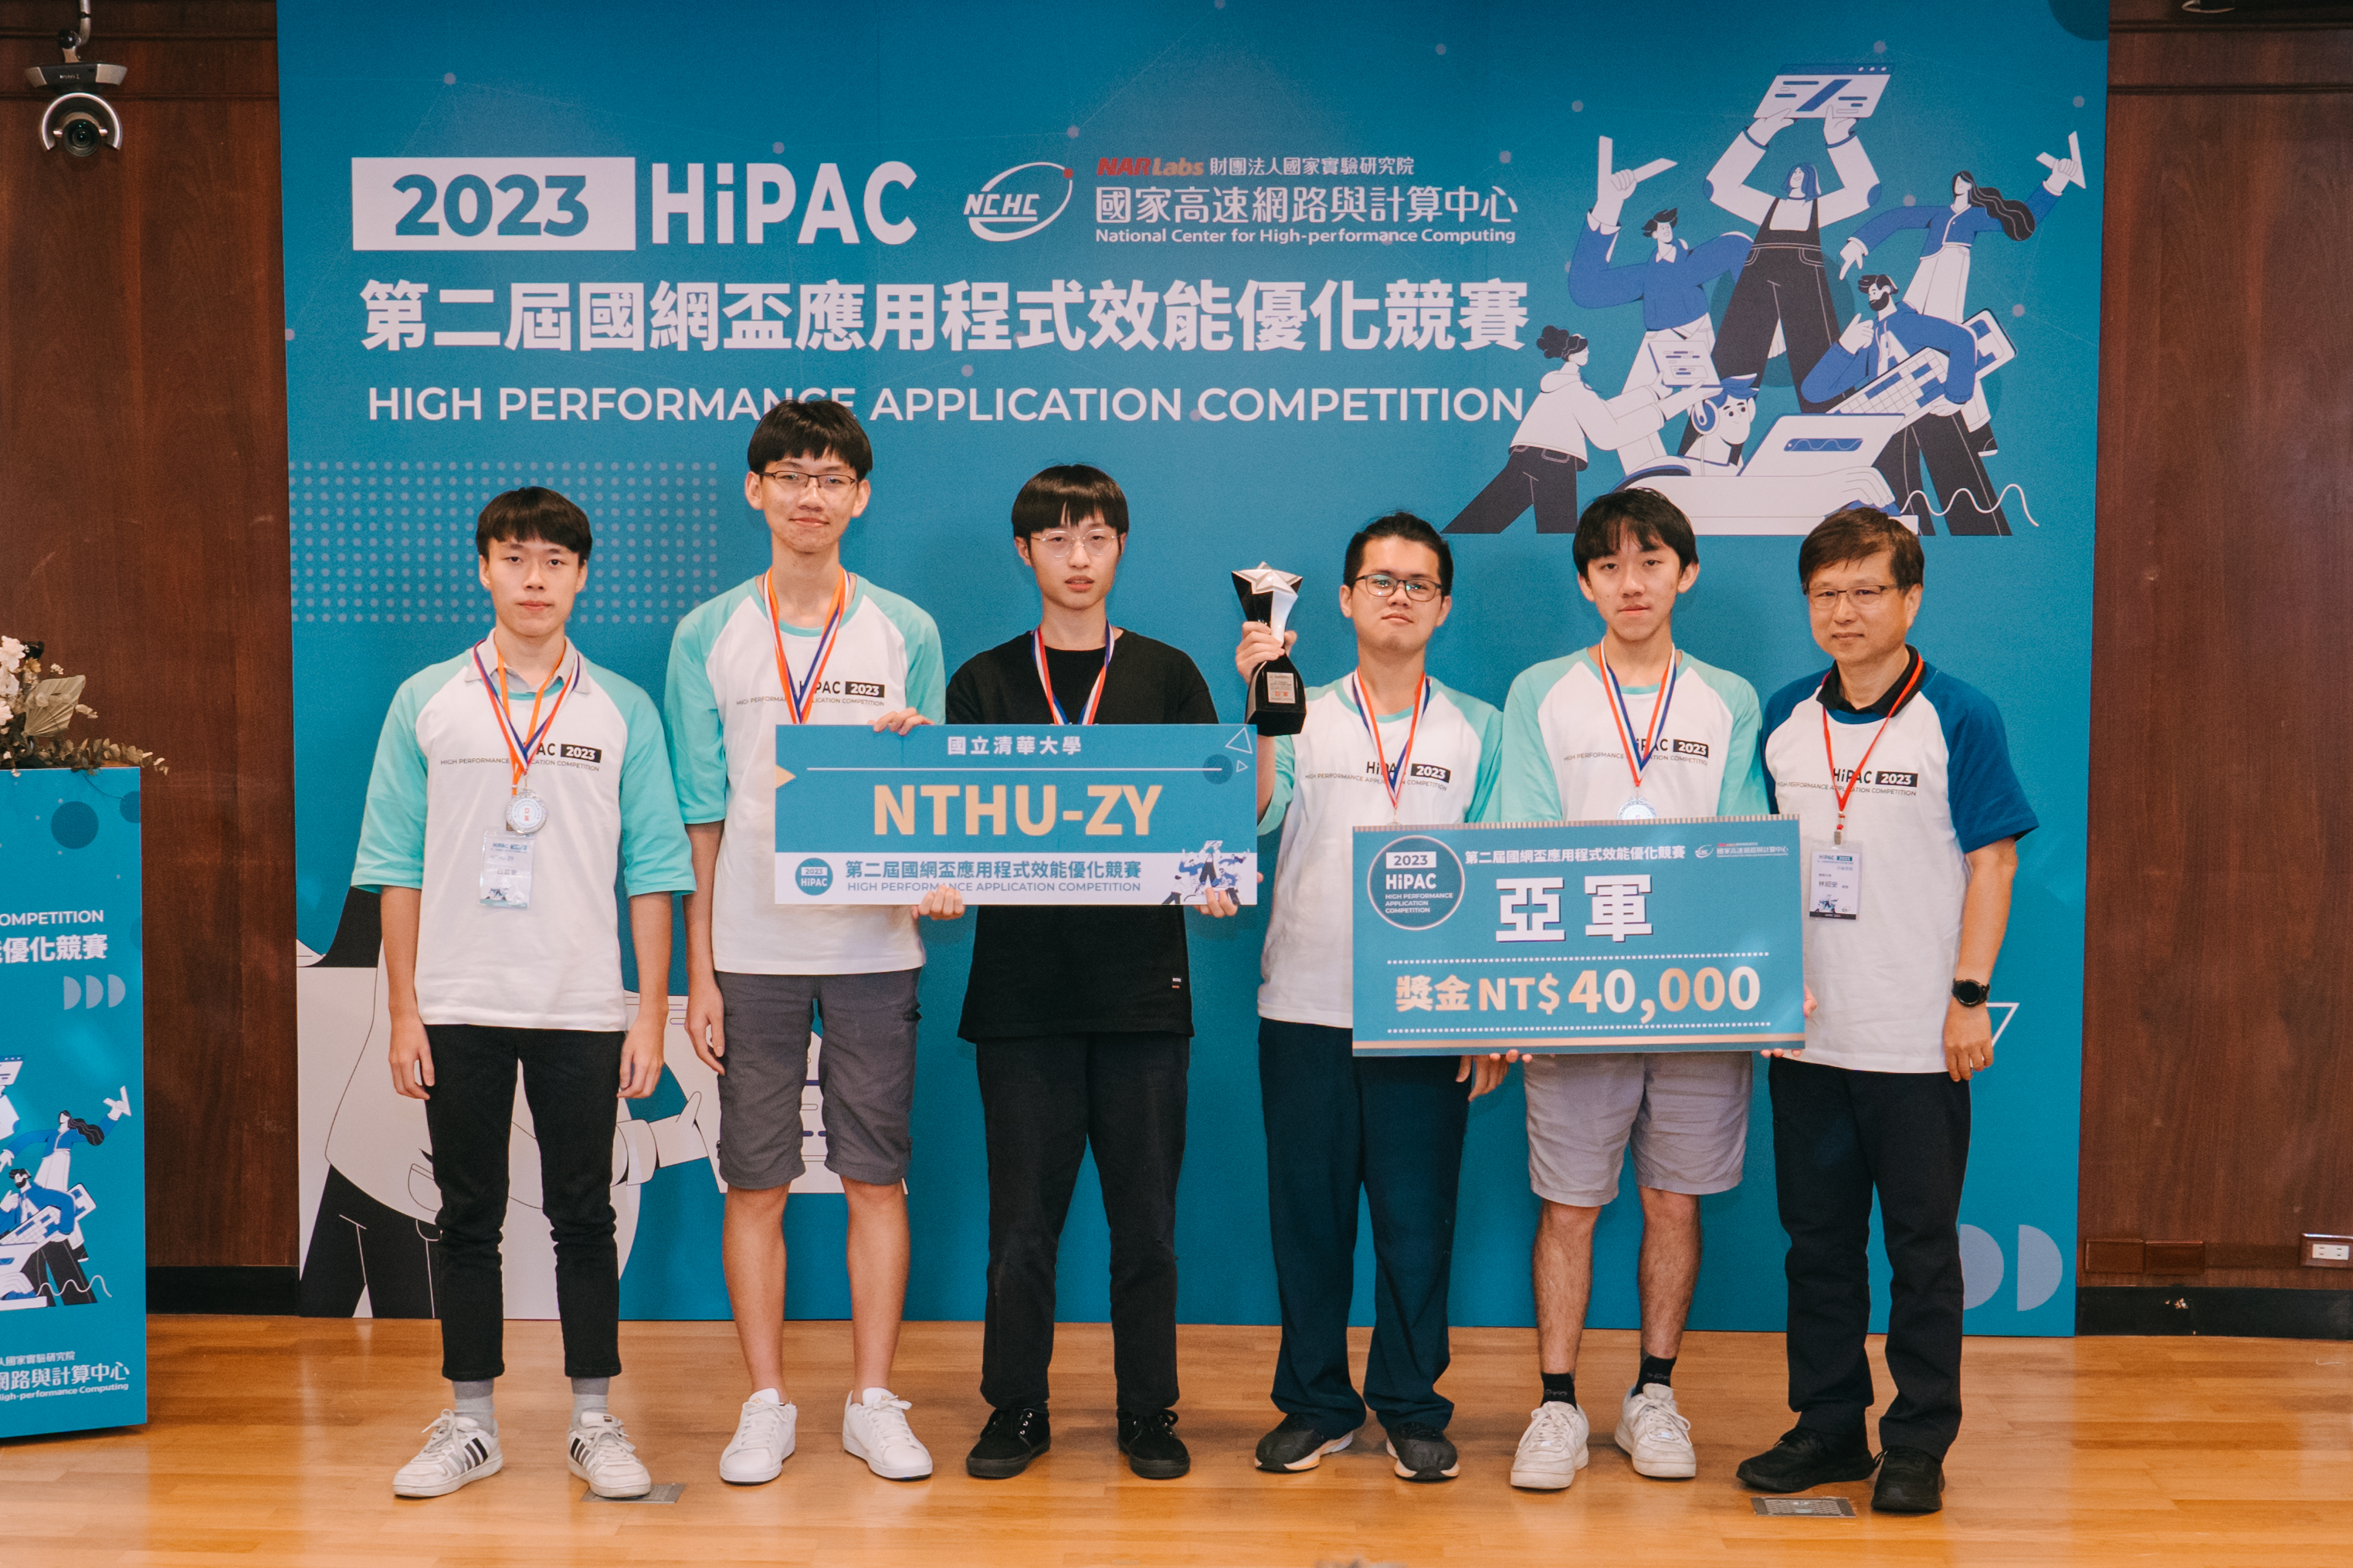 Director Lin Chao-An of the Department of Motivation Engineering of Tsinghua University presented the award to the runner-up NTHU-ZY of Tsinghua University.